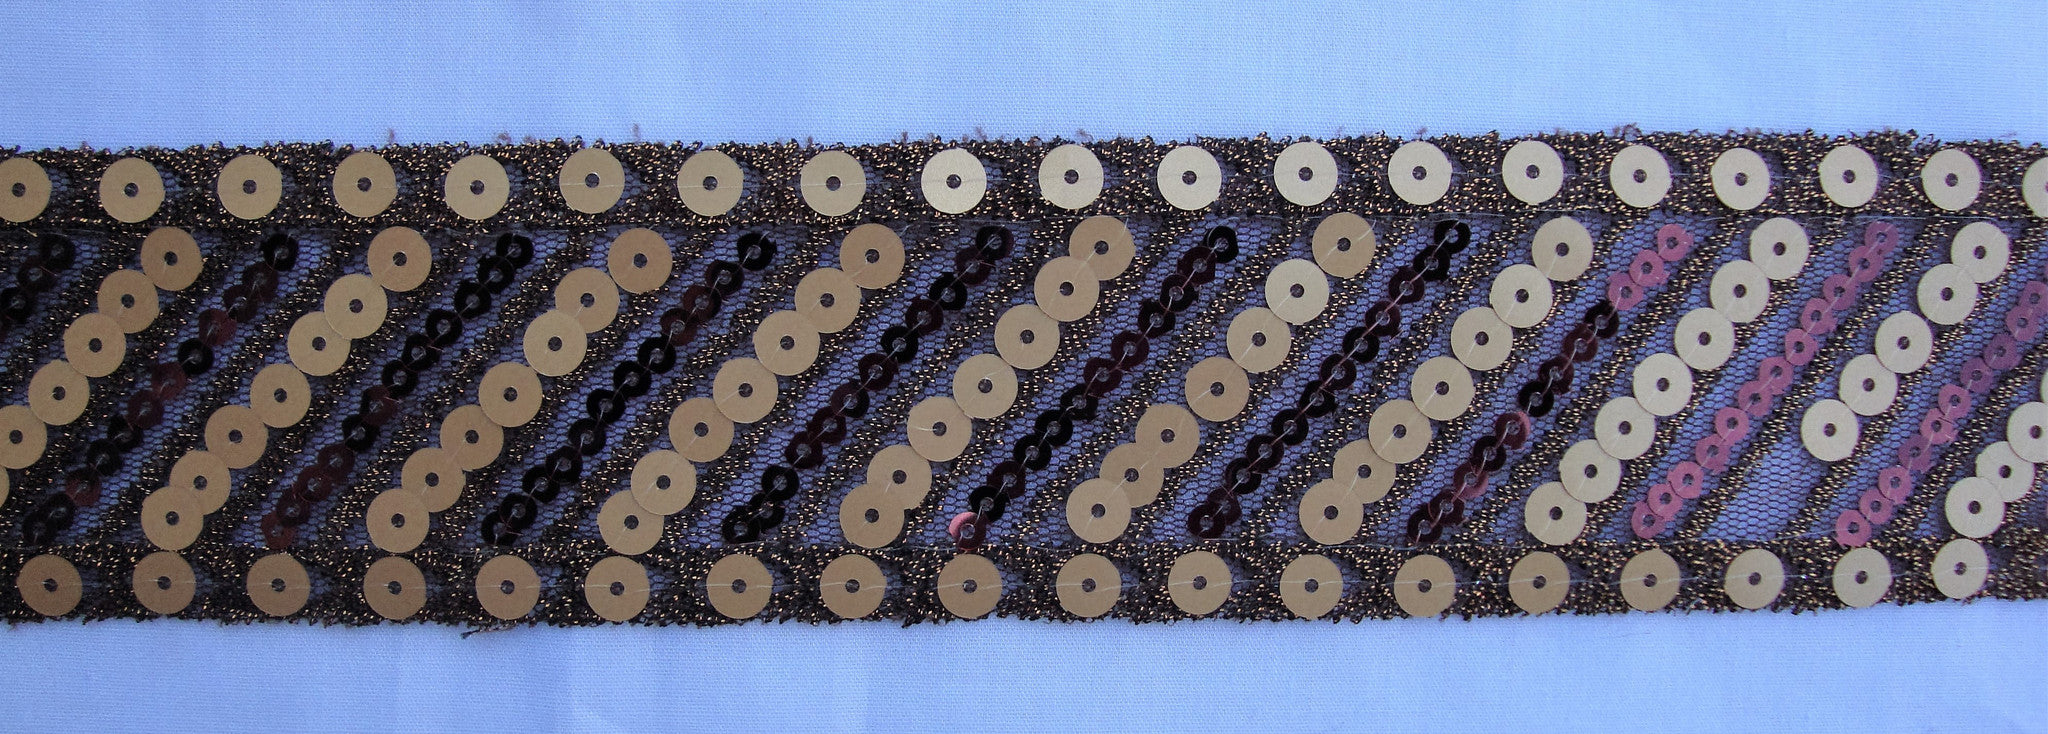 Brown Mesh Trimming with Sequins (Sold as a 3 yard piece)